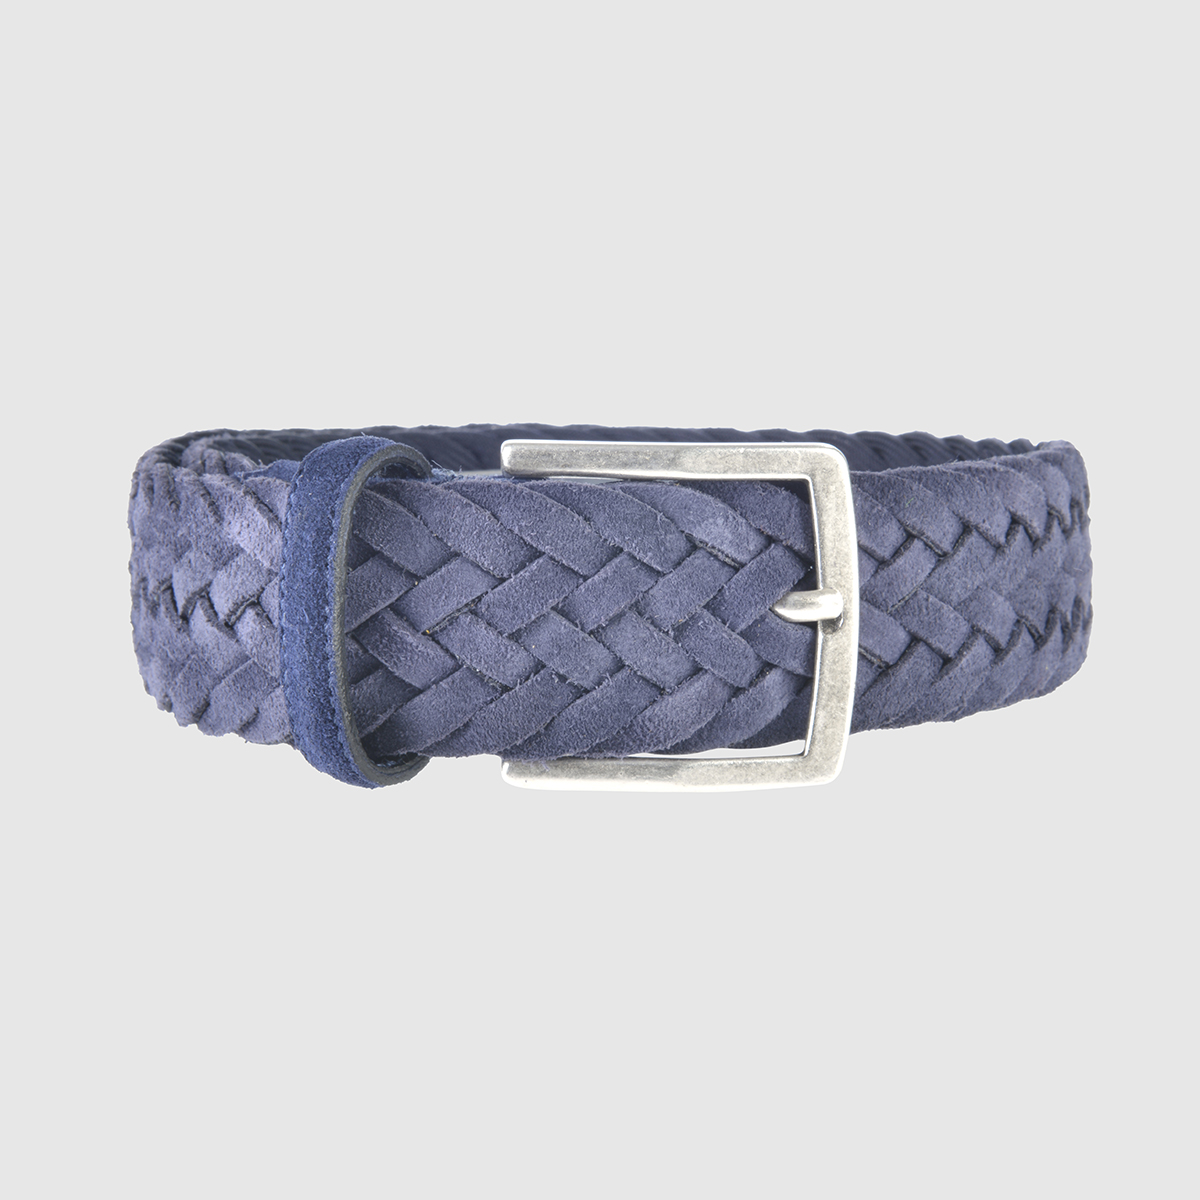 Antelope Creel Woven Suede Belt Athison on sale 2022 3